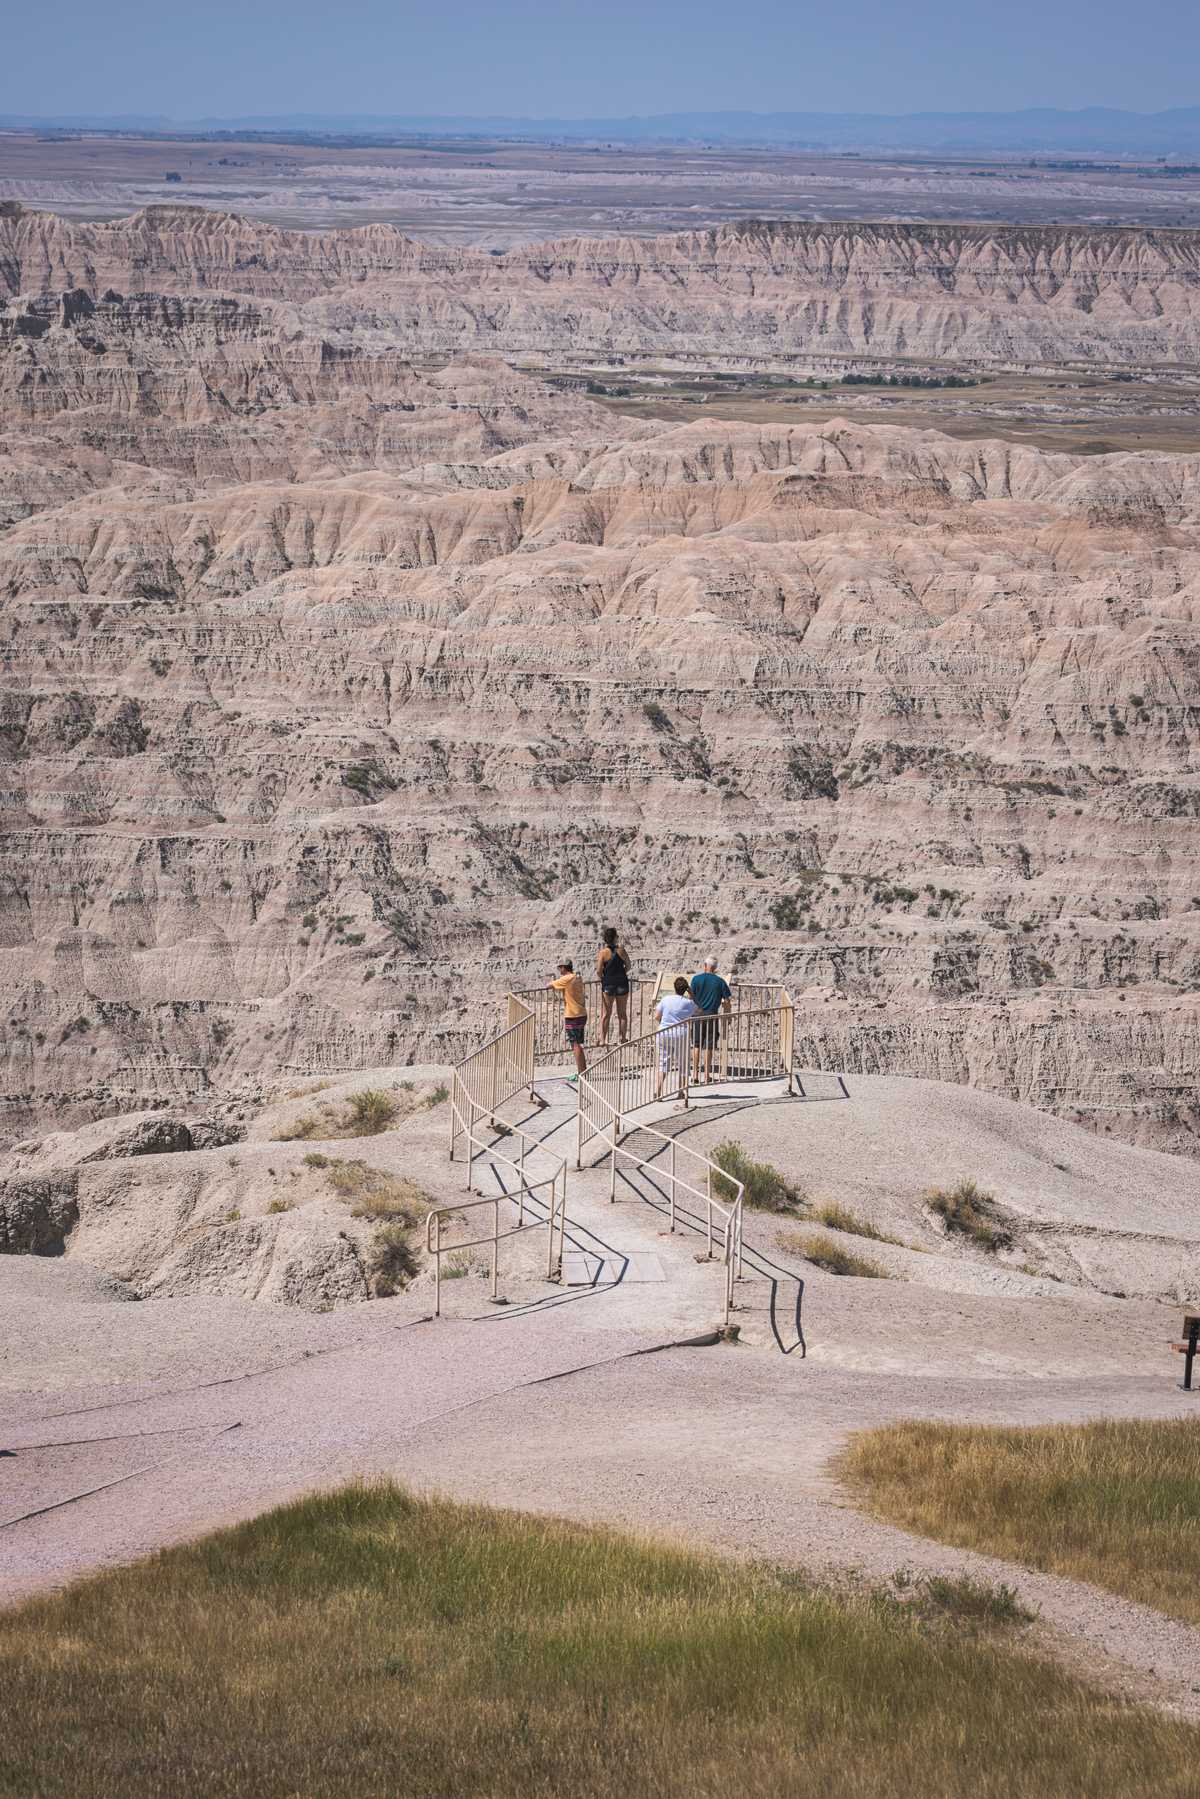 A small group of people stand in a small, fenced-off observation area on a cliff viewed from behind as miles and miles of rocky hills stretch into the distance